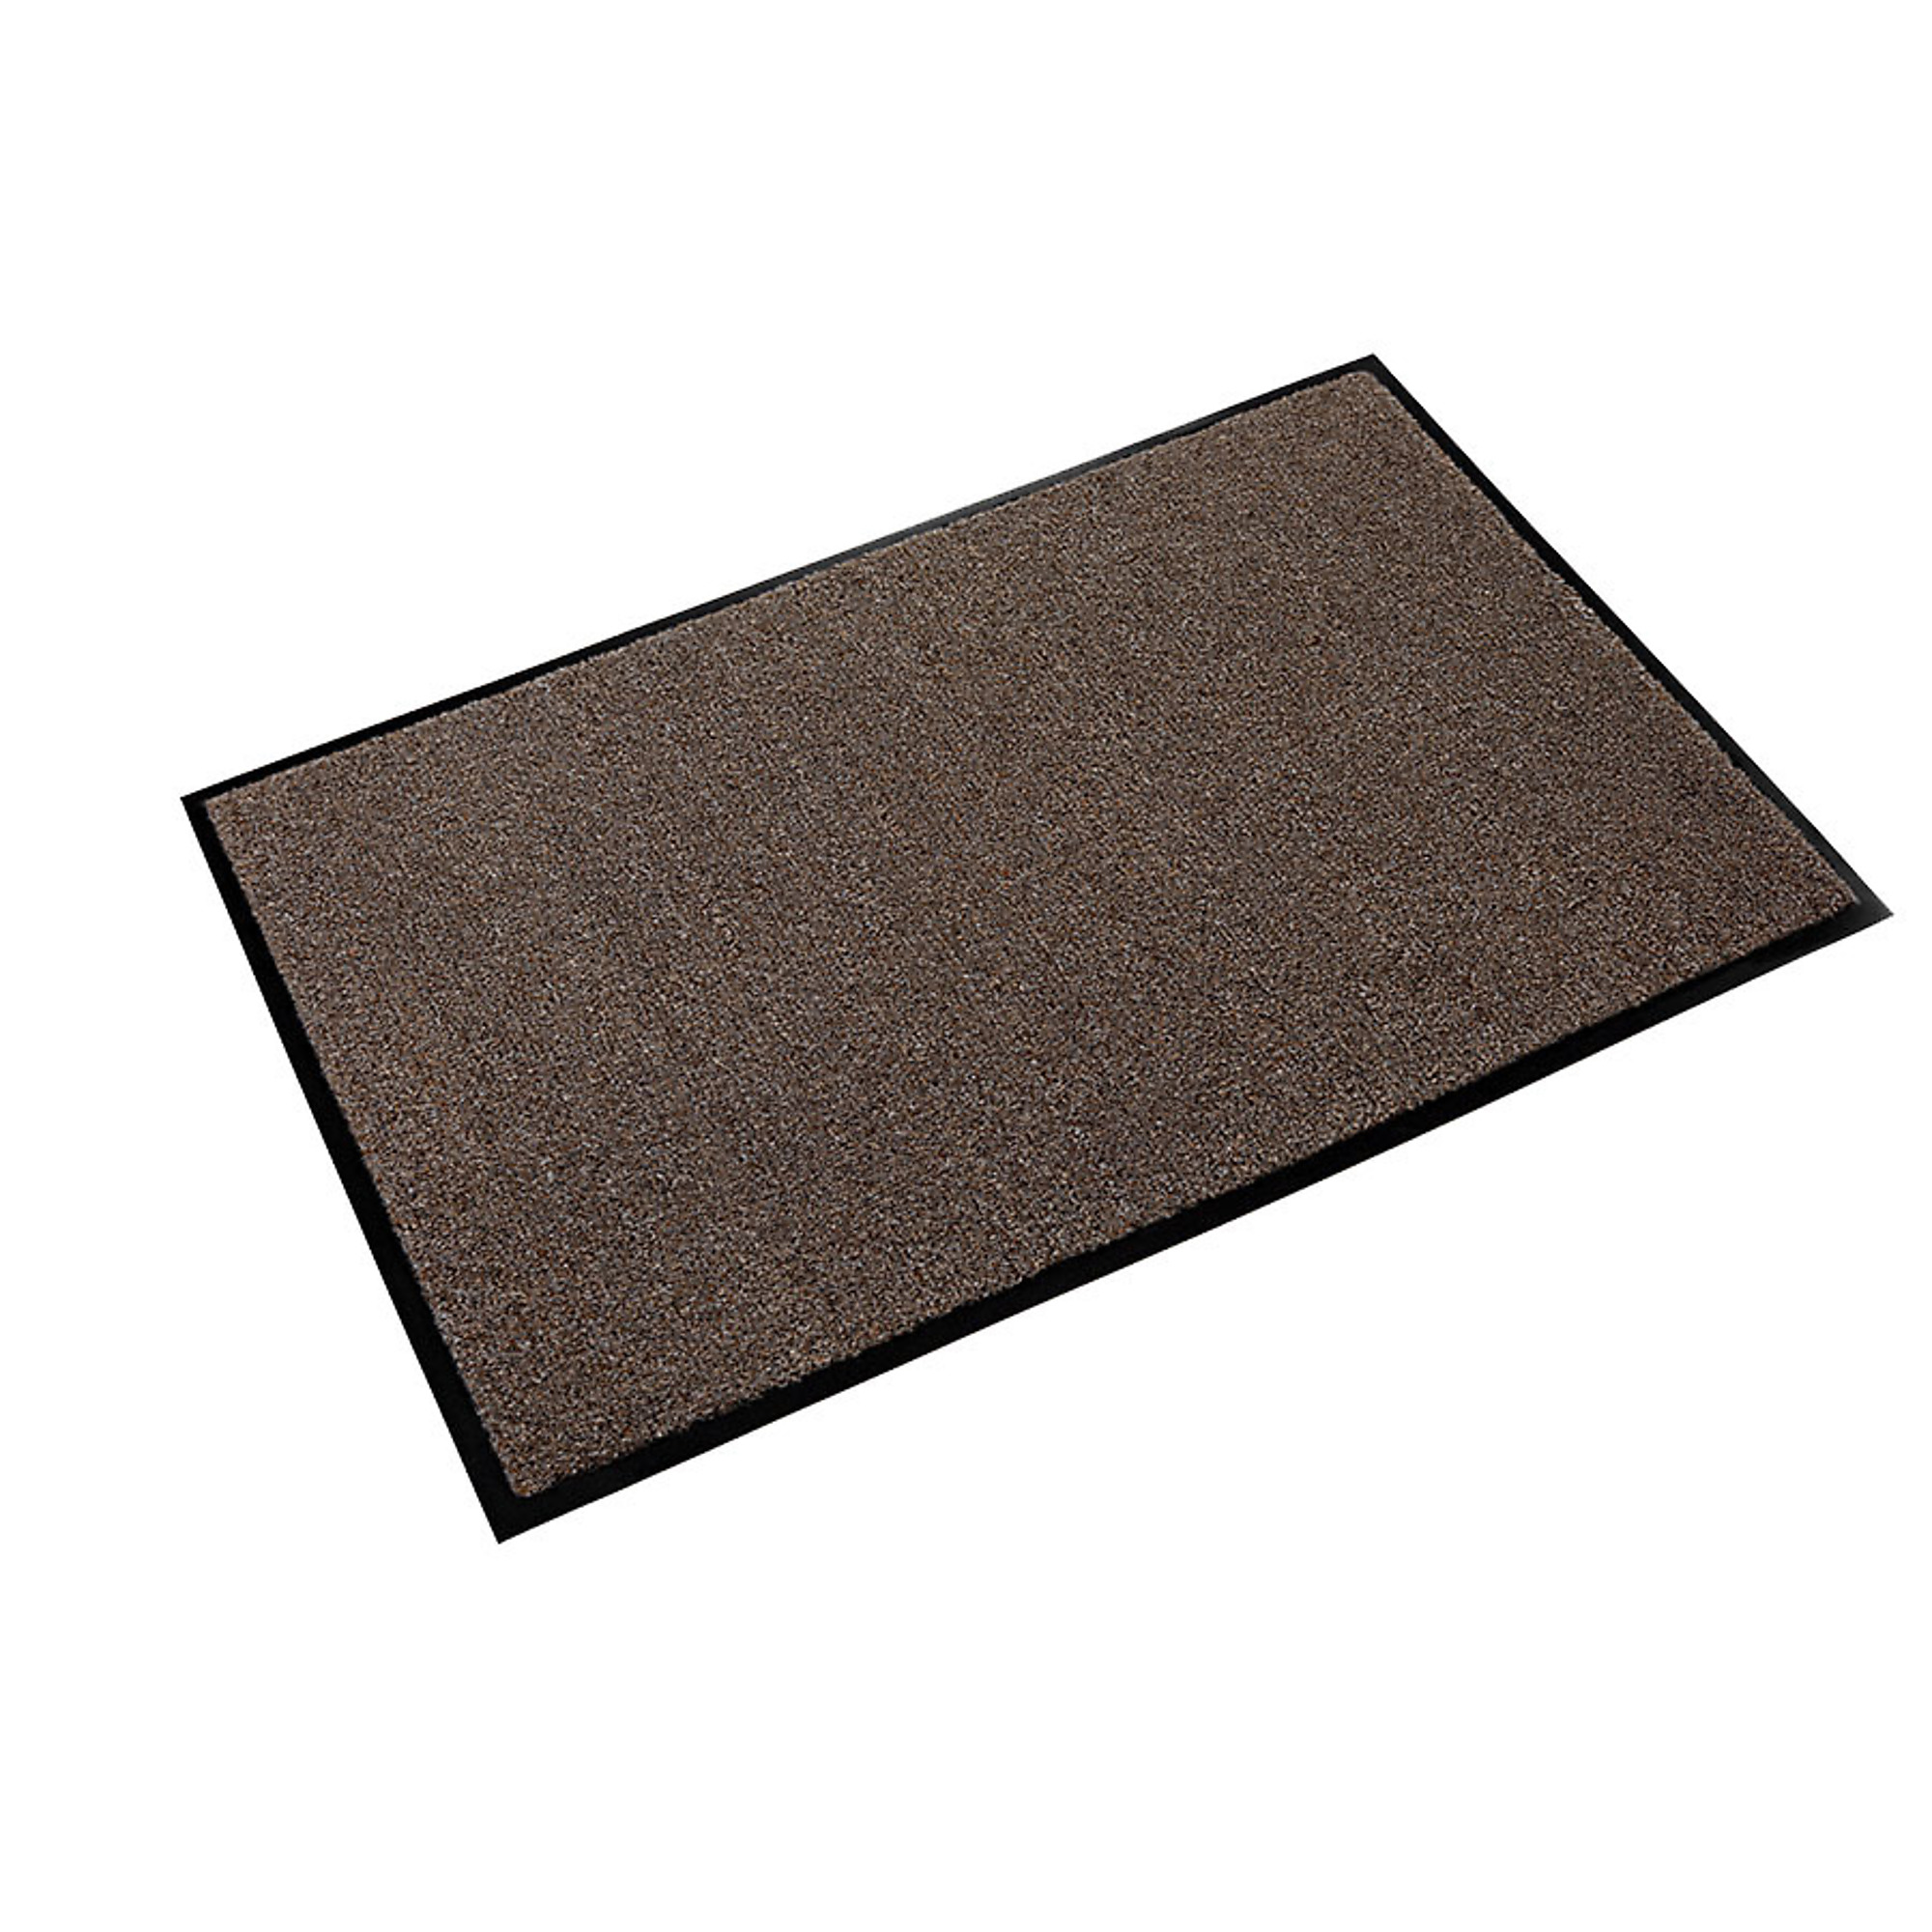 Crown Matting Technologies, Rely-On Olefin 3ft.x60ft. Walnut, Width 36 in, Length 720 in, Thickness 3/8 in, Model GSR0036WA